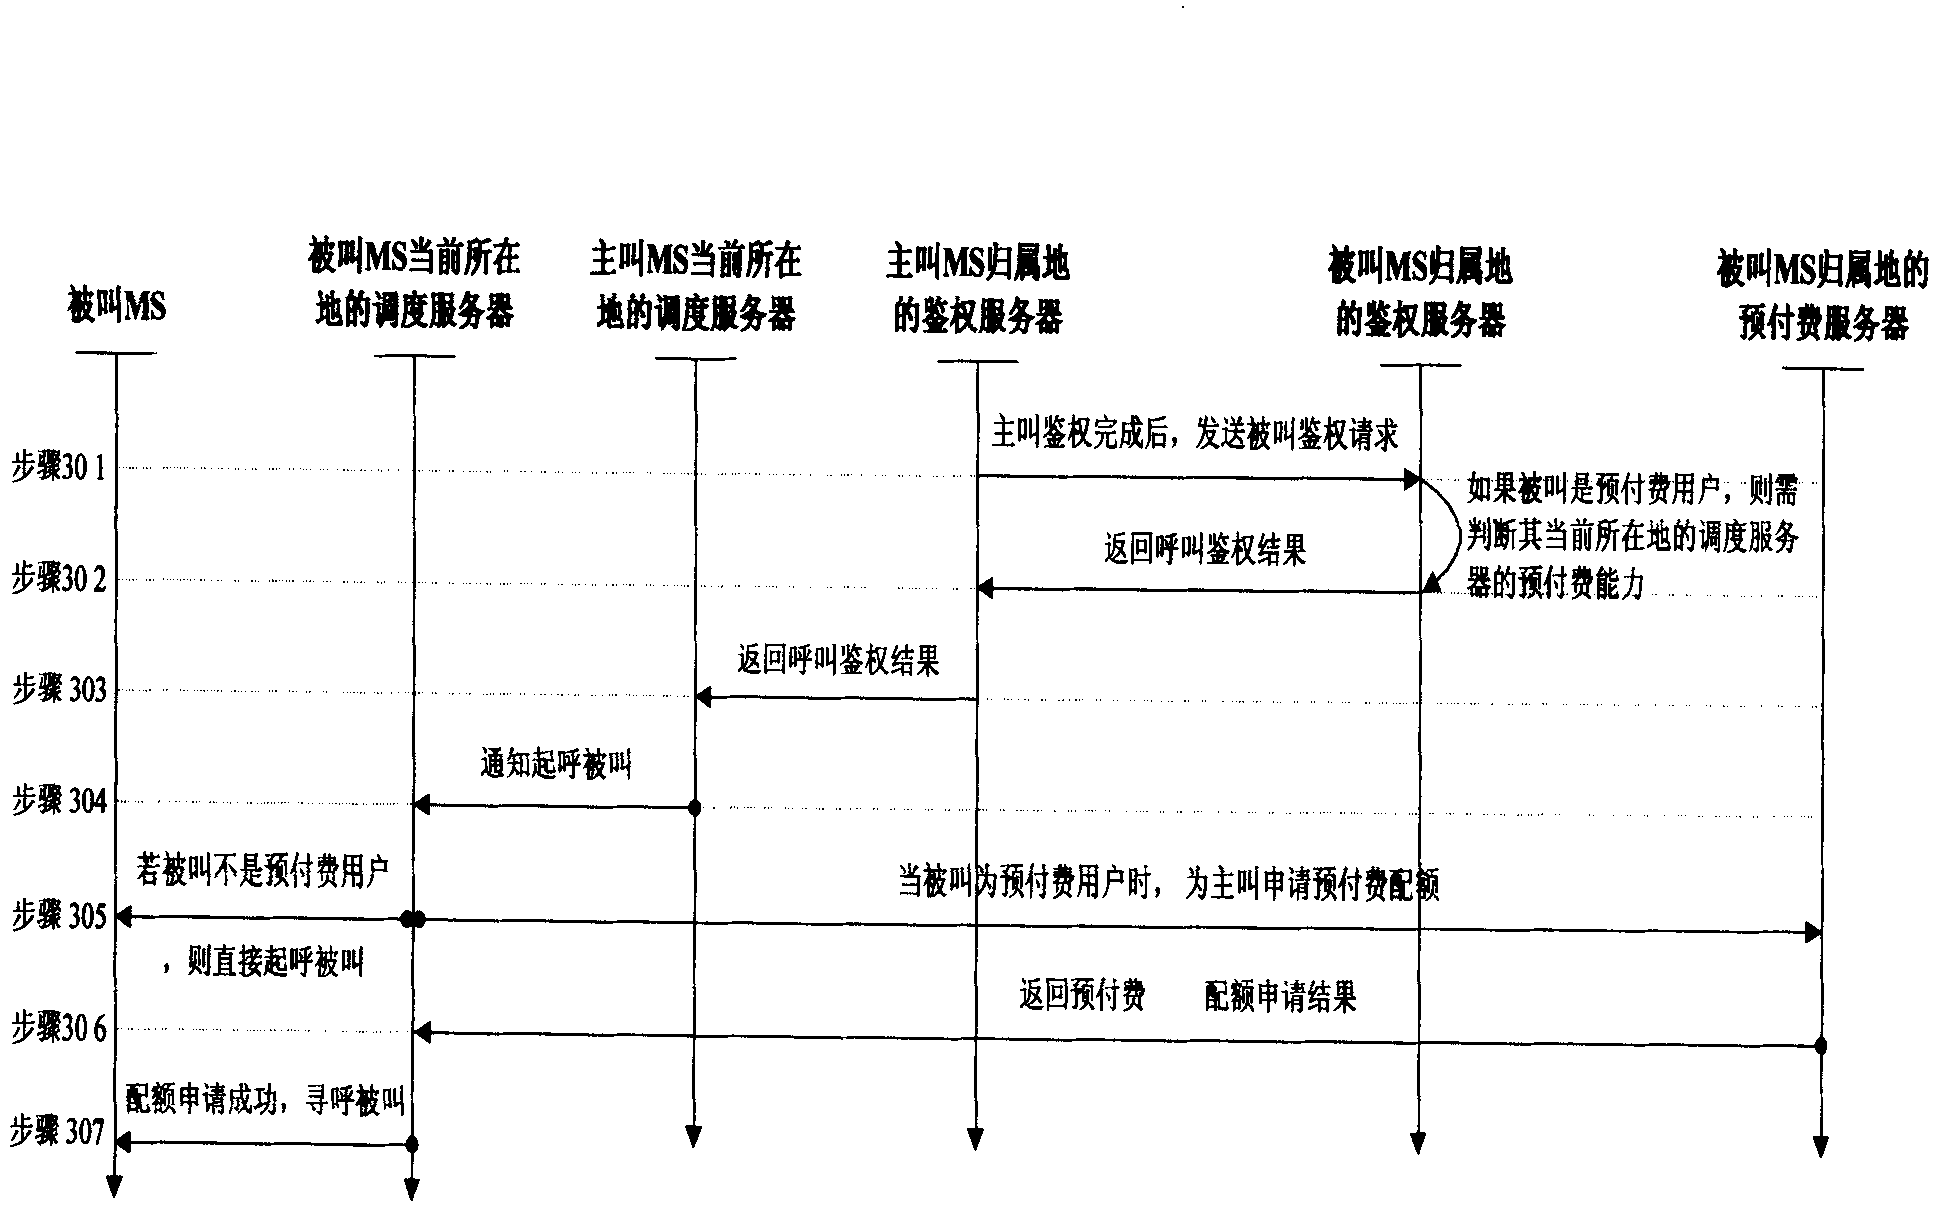 Access control method for prepaid users in cluster communication system